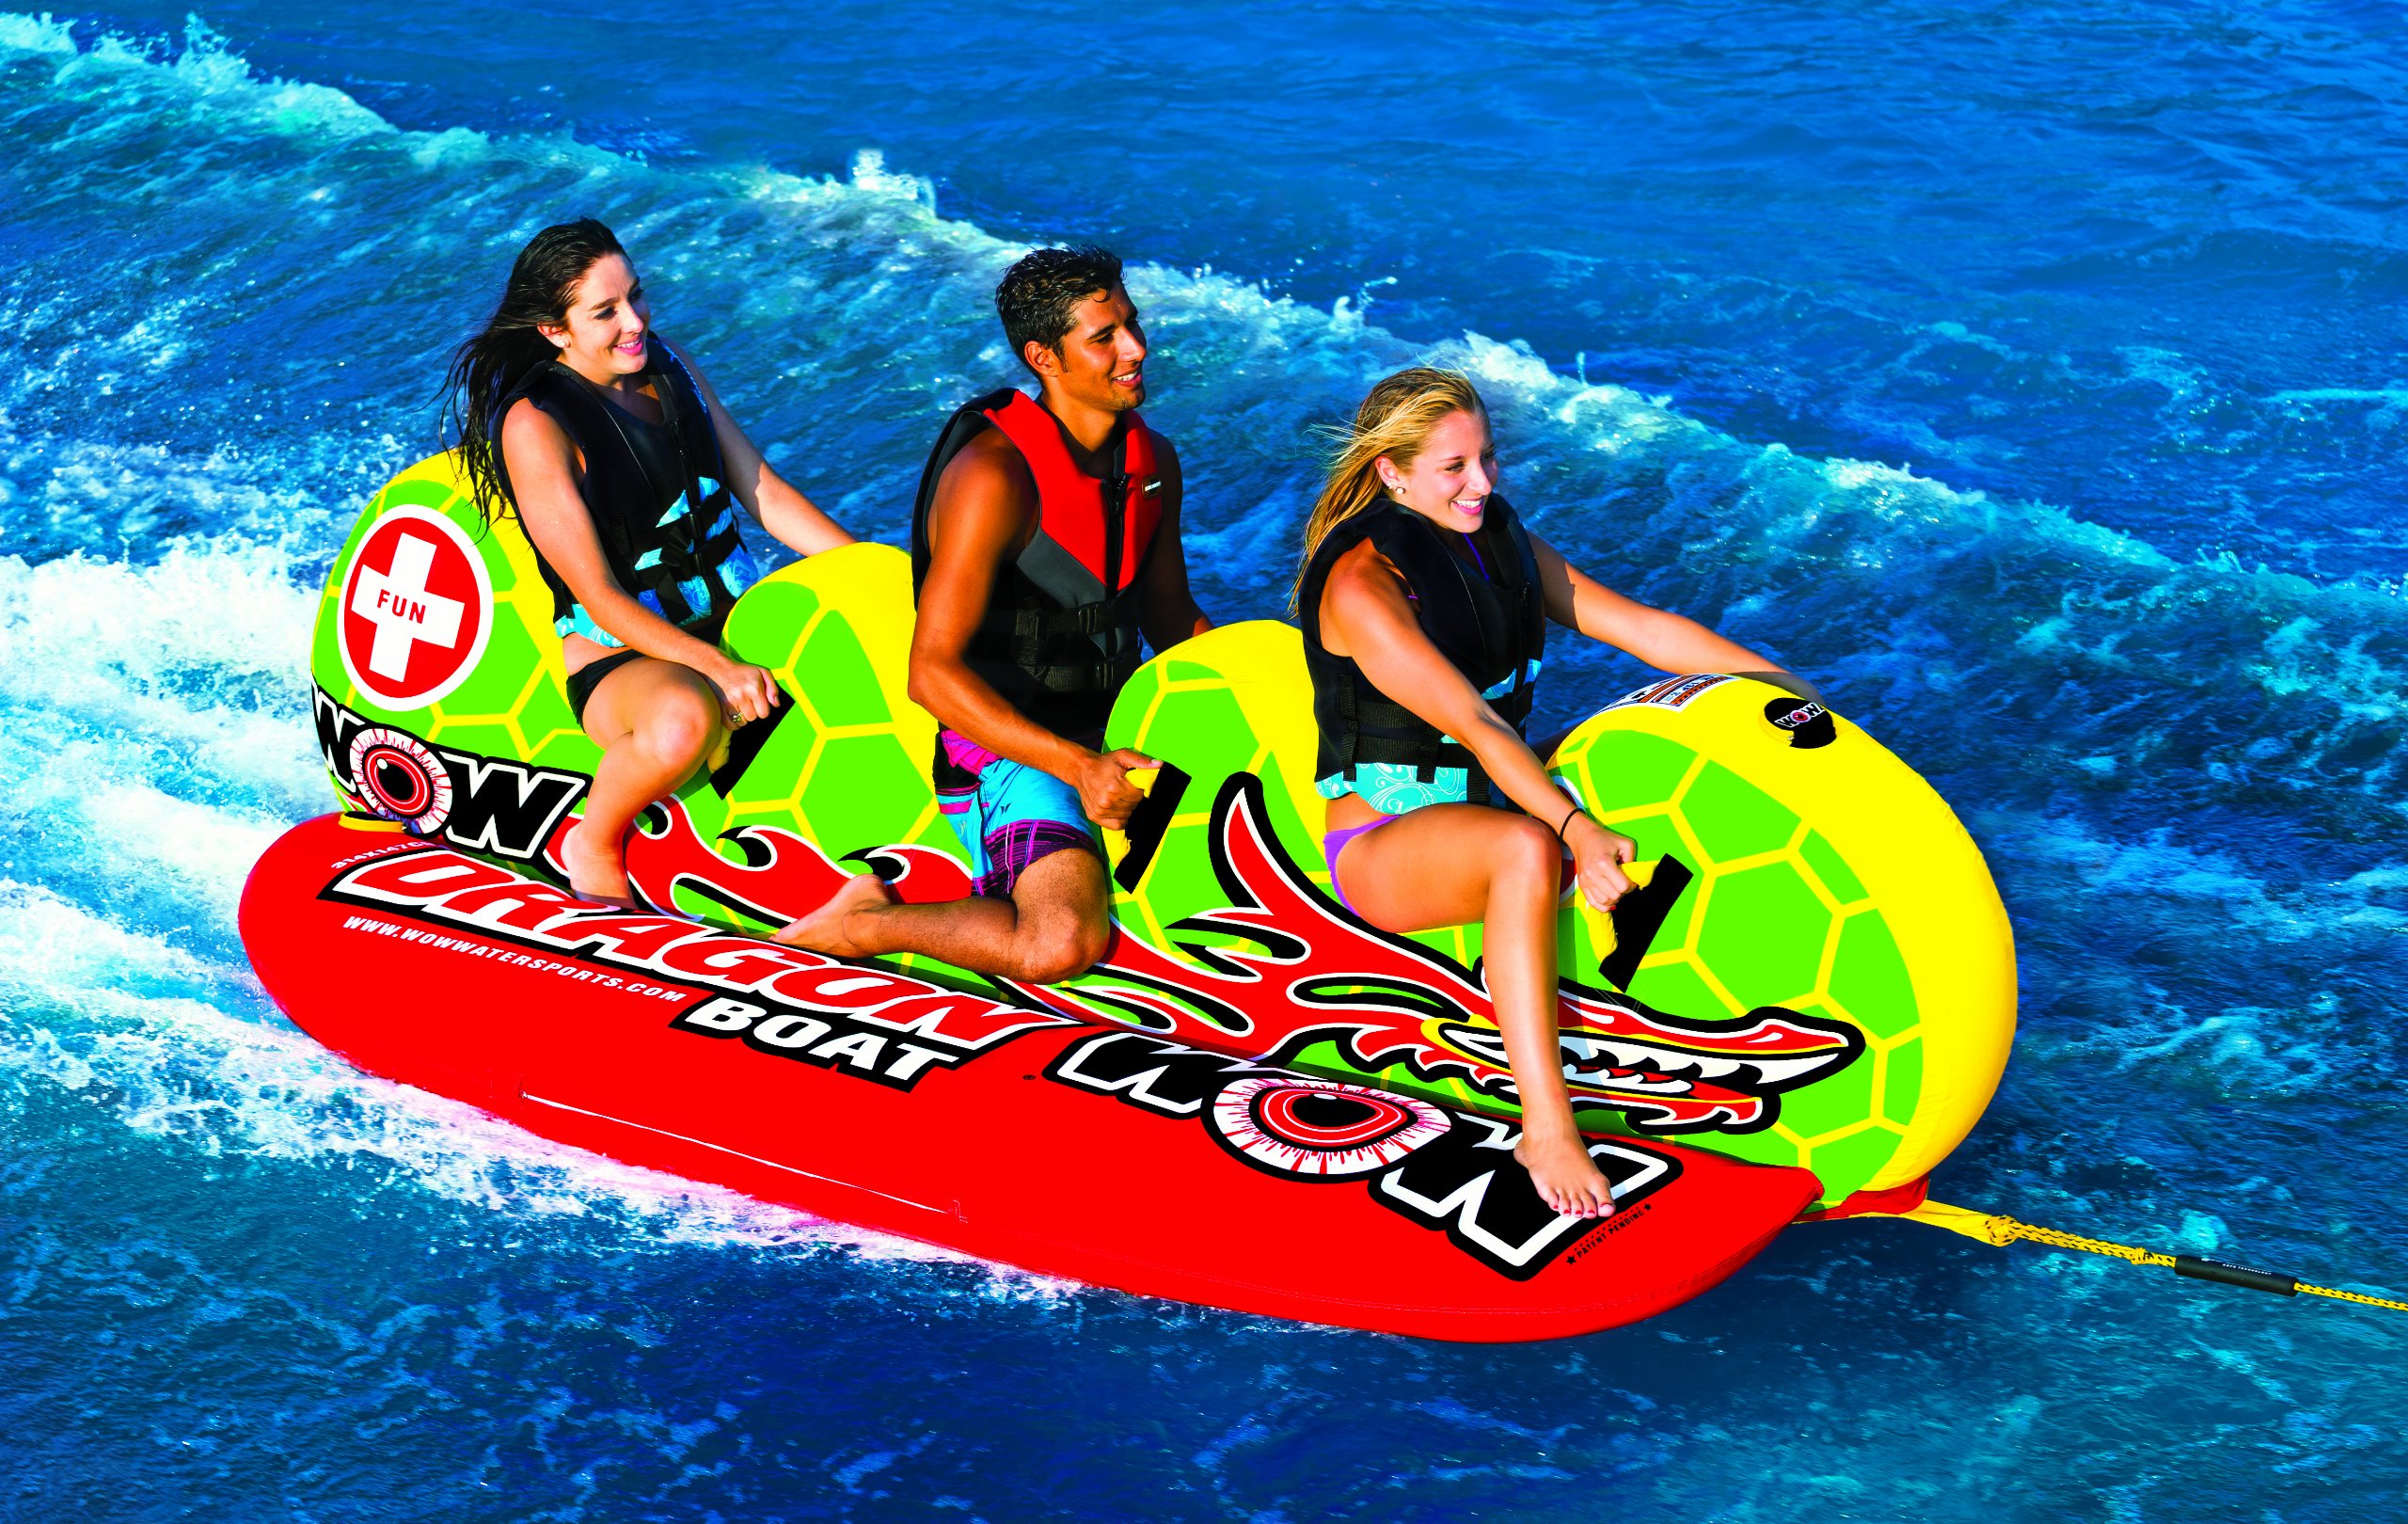 WOW World of Watersports Dragon Boat Cockpit 1 2 or 3 Person Inflatable Towable Cockpit Tube for Boating, 13-1060